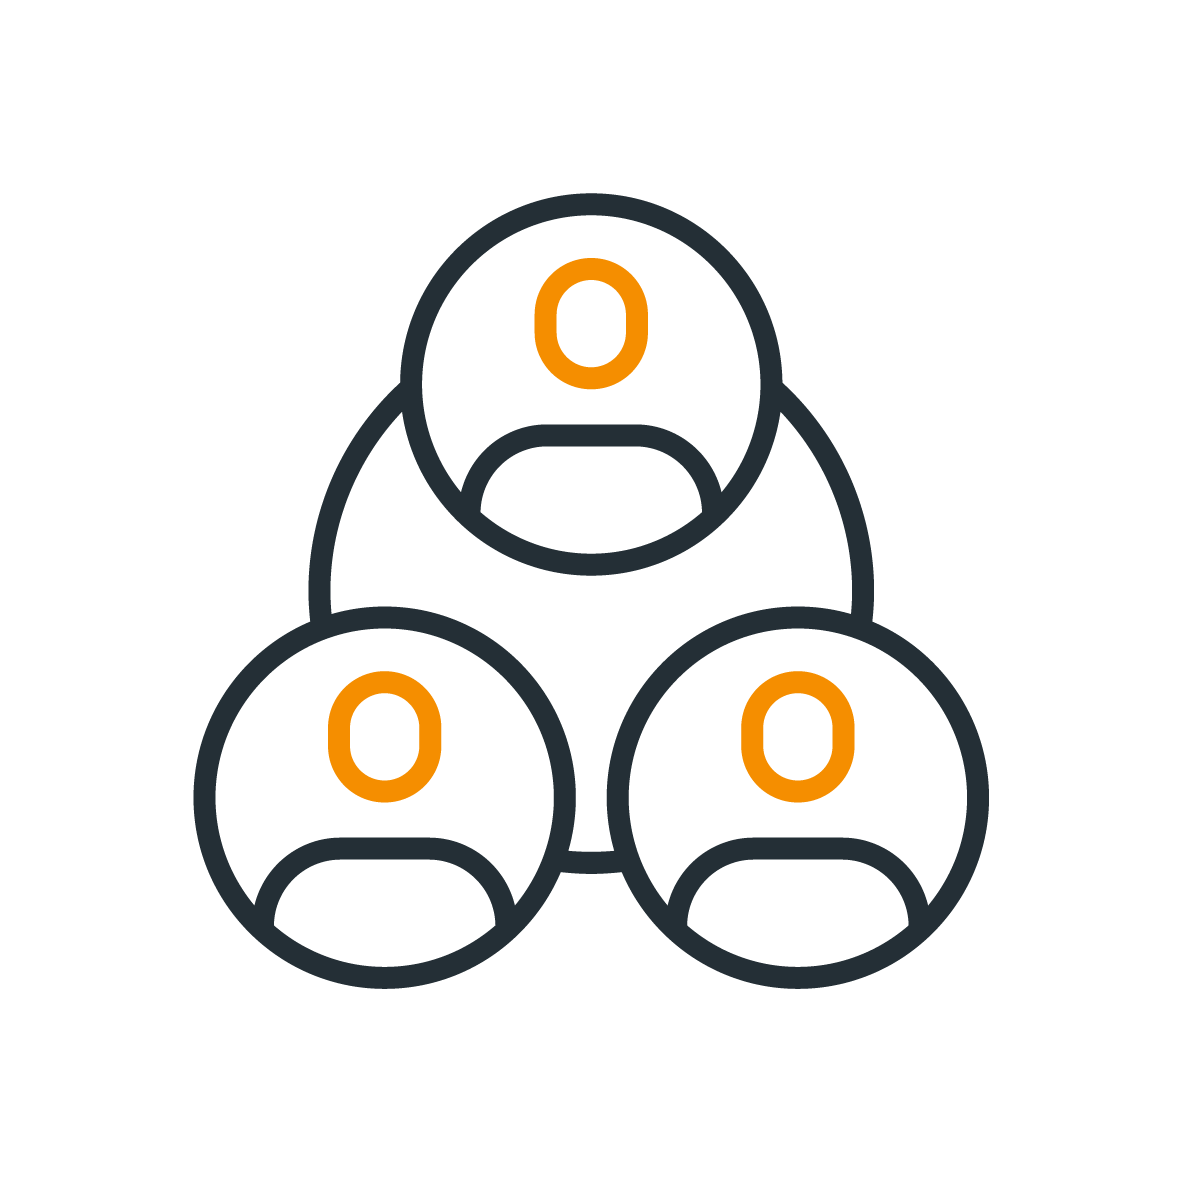 A glyph of a three people conjoined by a circle